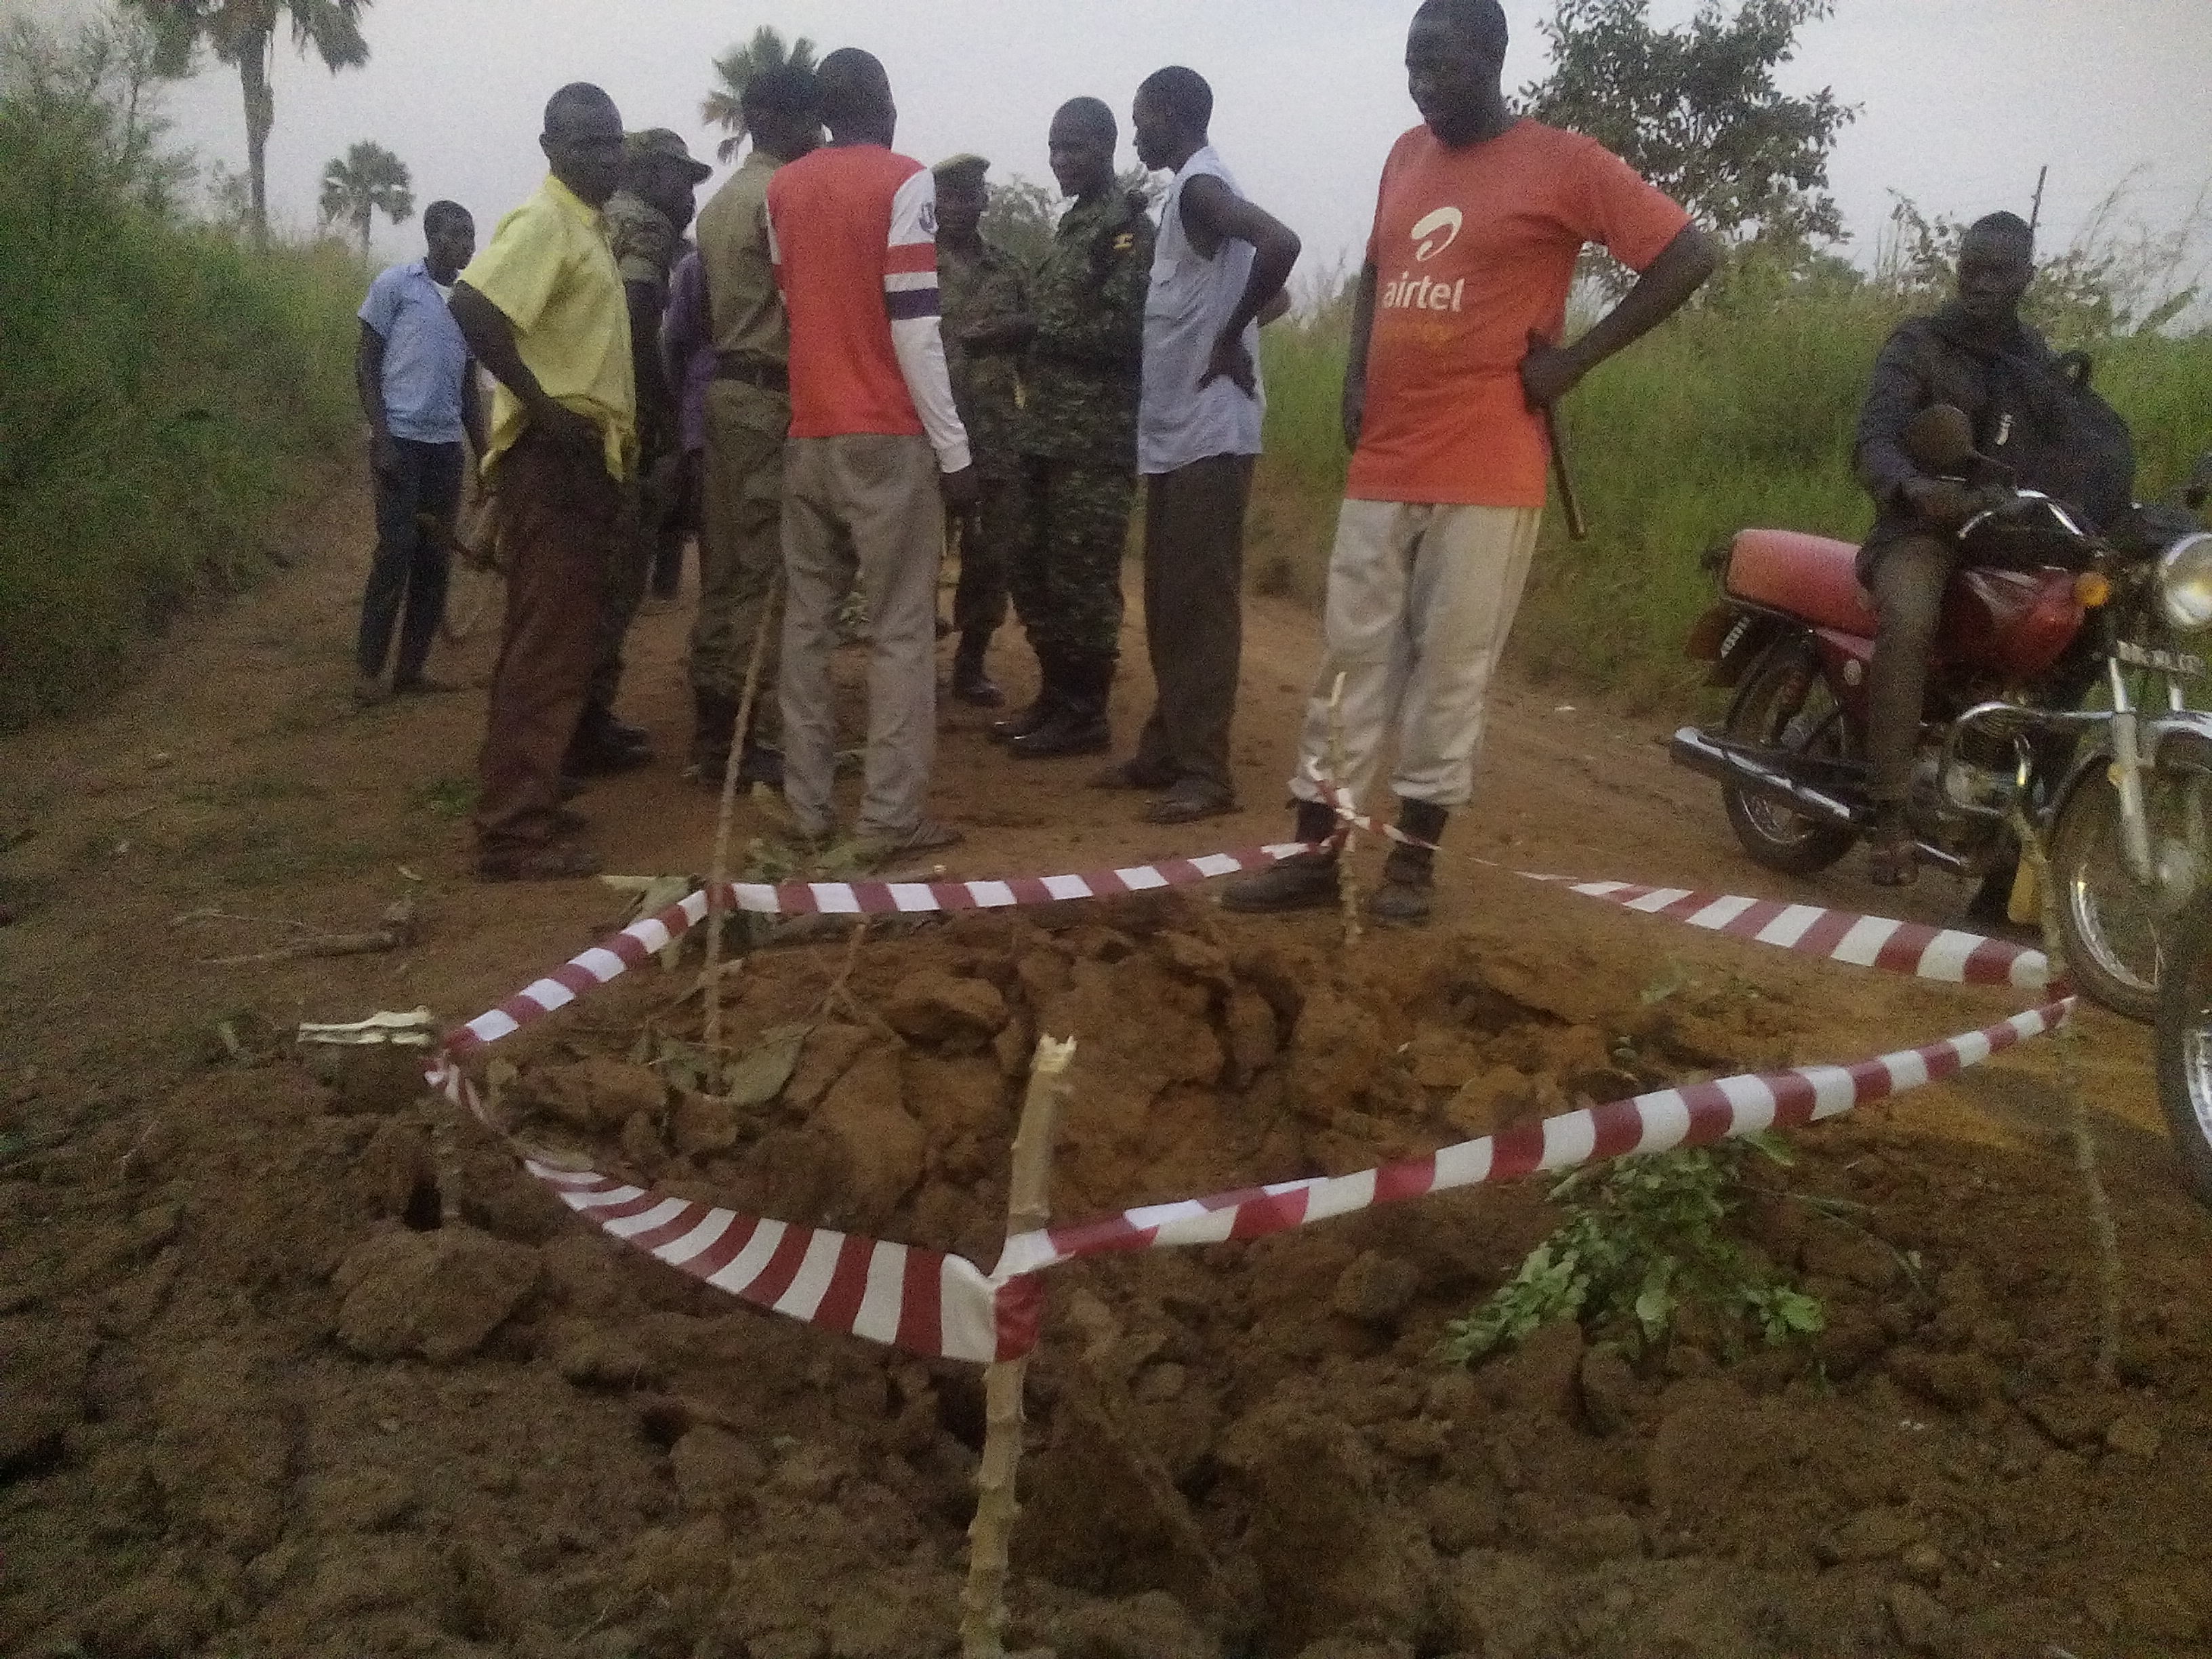 UPDF marks the area found with the unexploded ordinace on thursday